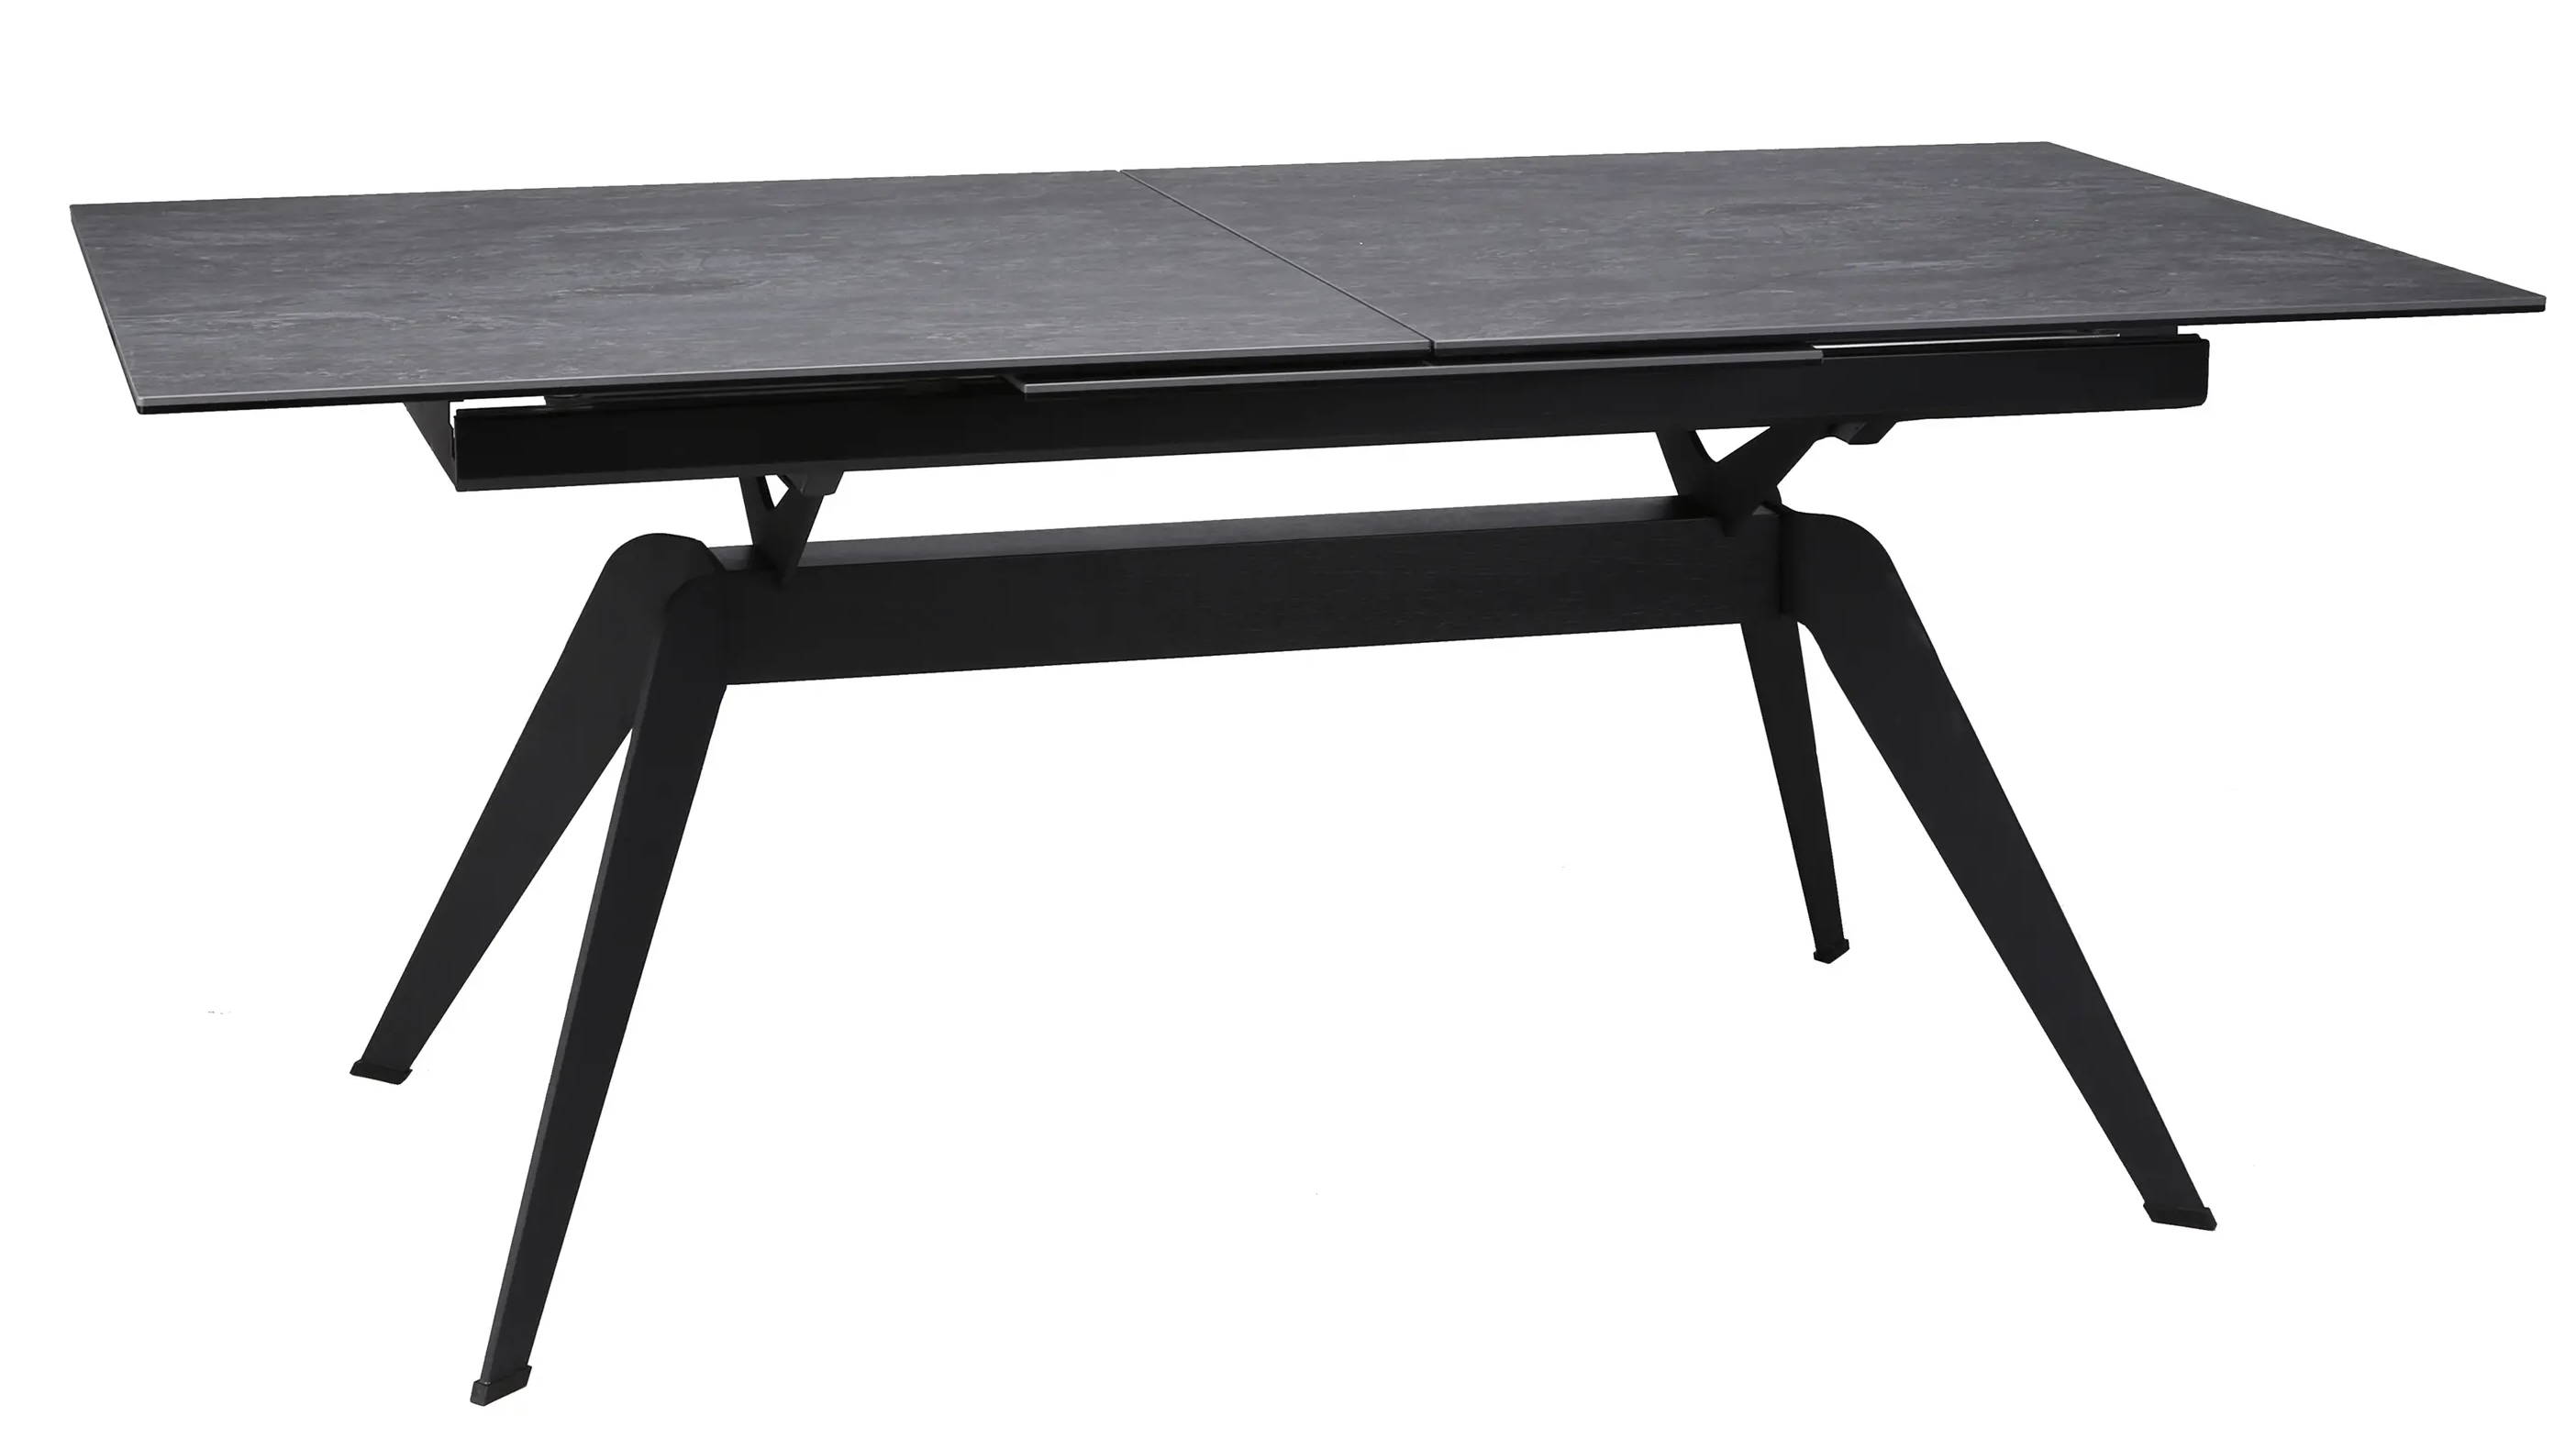 An all black table with a thin but elegant tabletop.